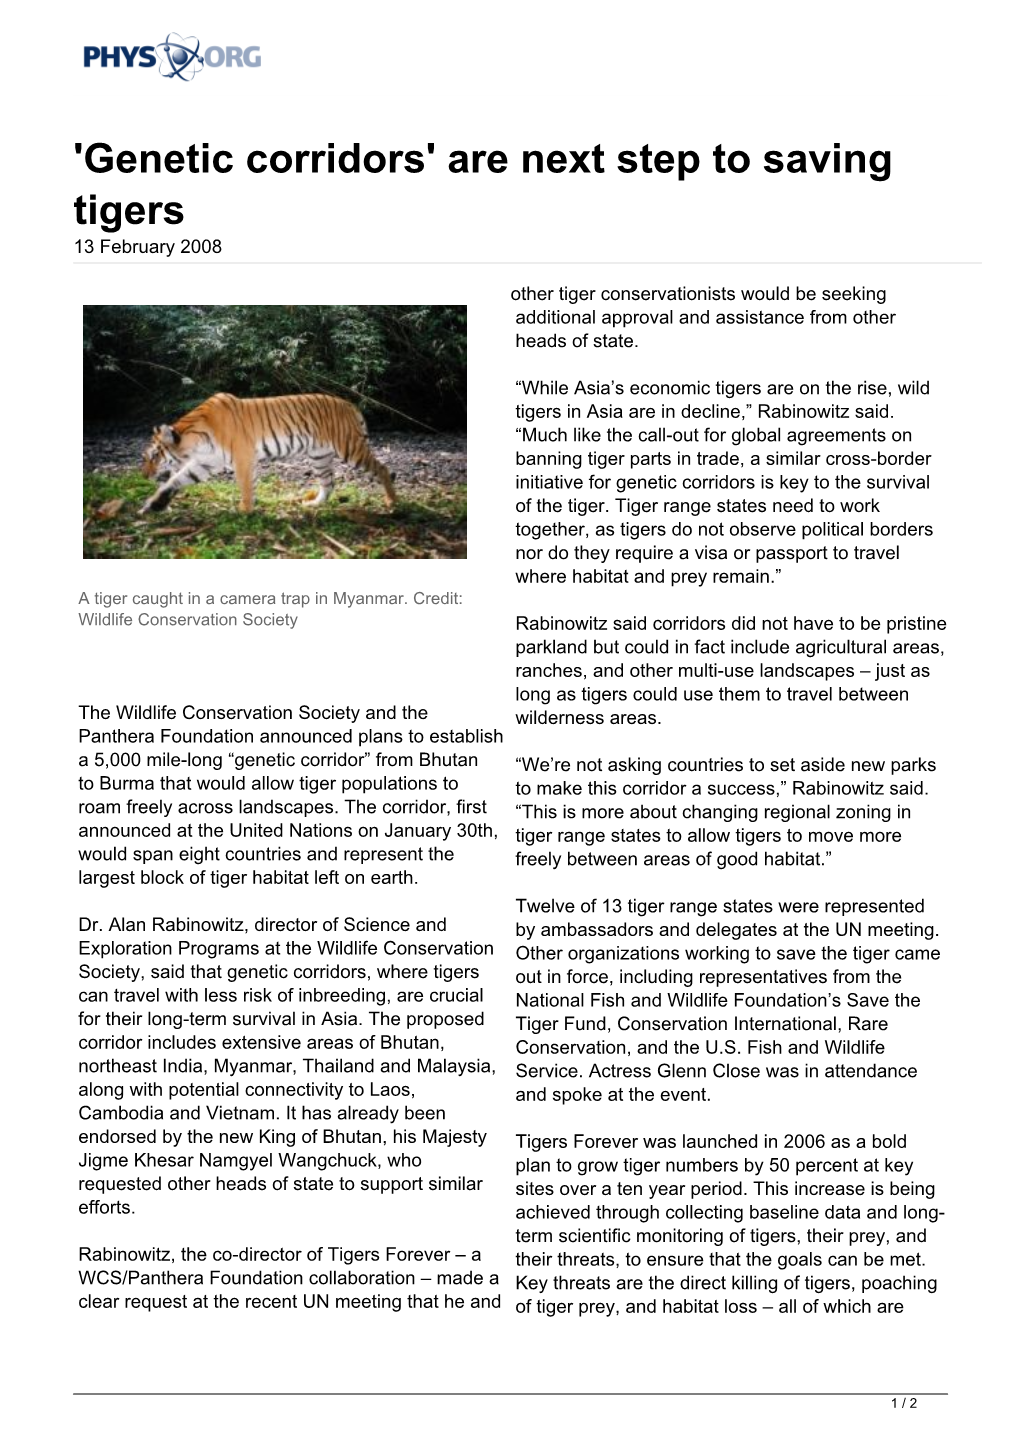 'Genetic Corridors' Are Next Step to Saving Tigers 13 February 2008